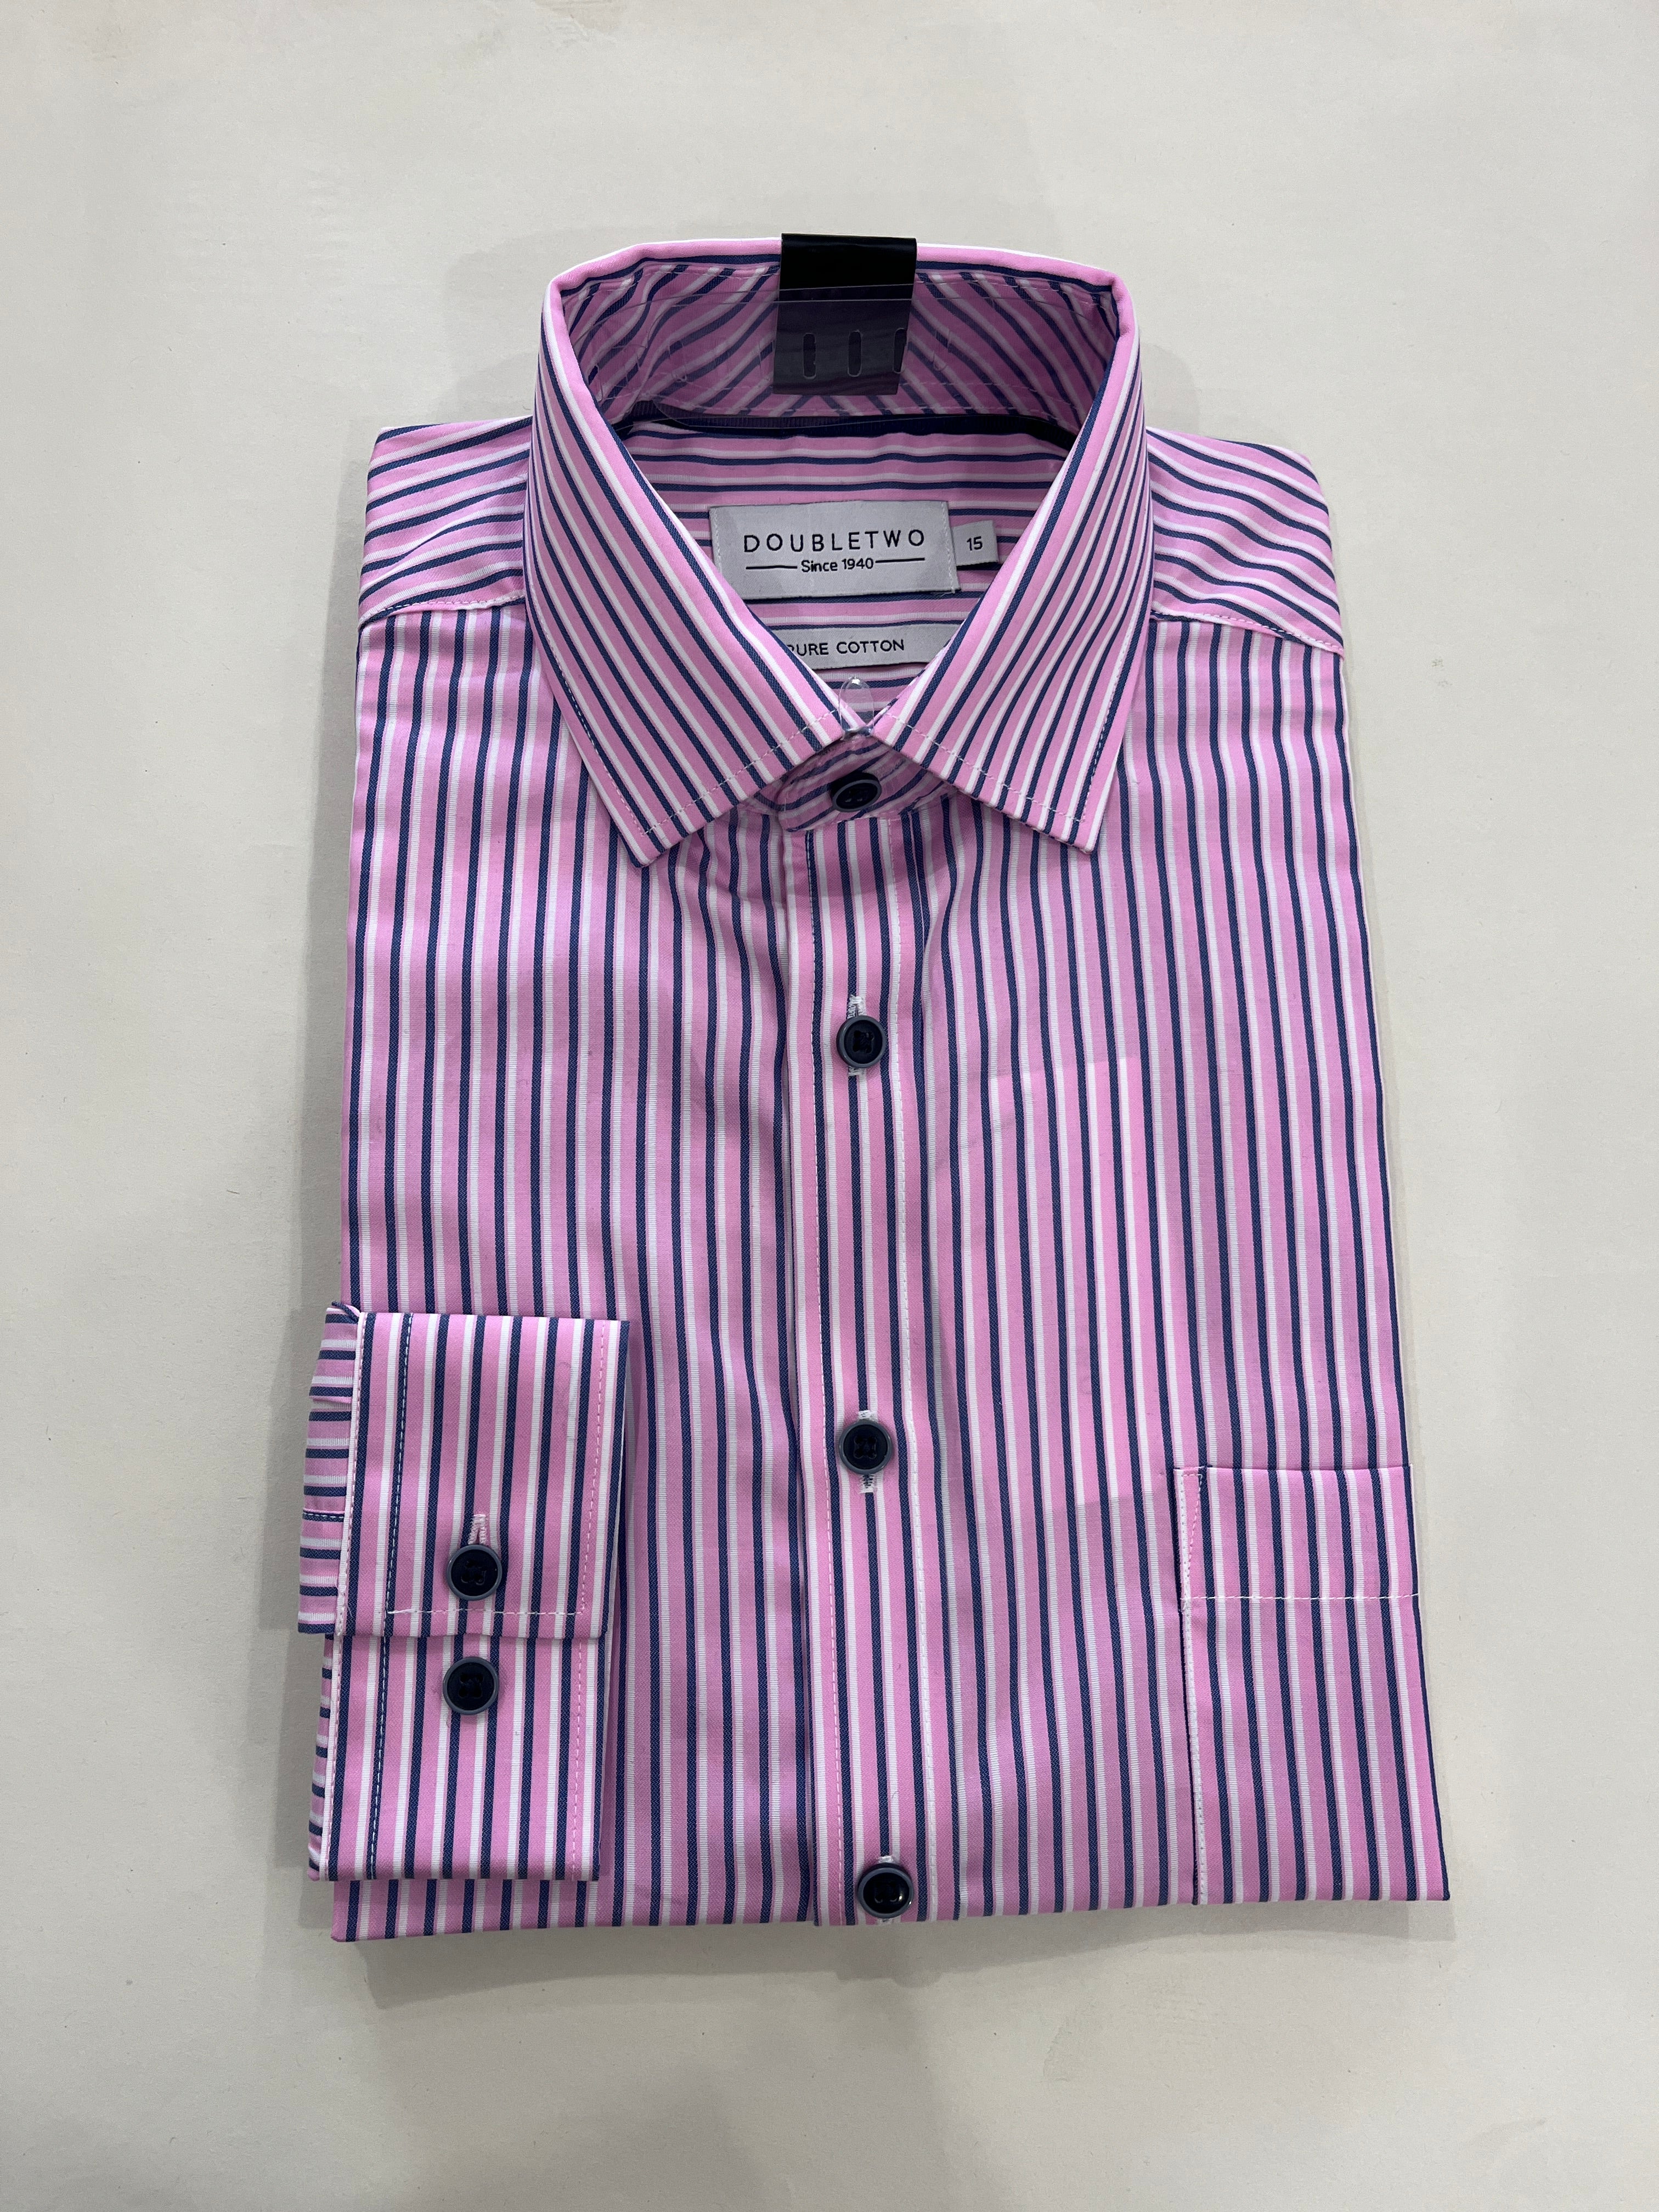 DOUBLE TWO PINK, BLUE AND WHITE STRIPED SHIRT